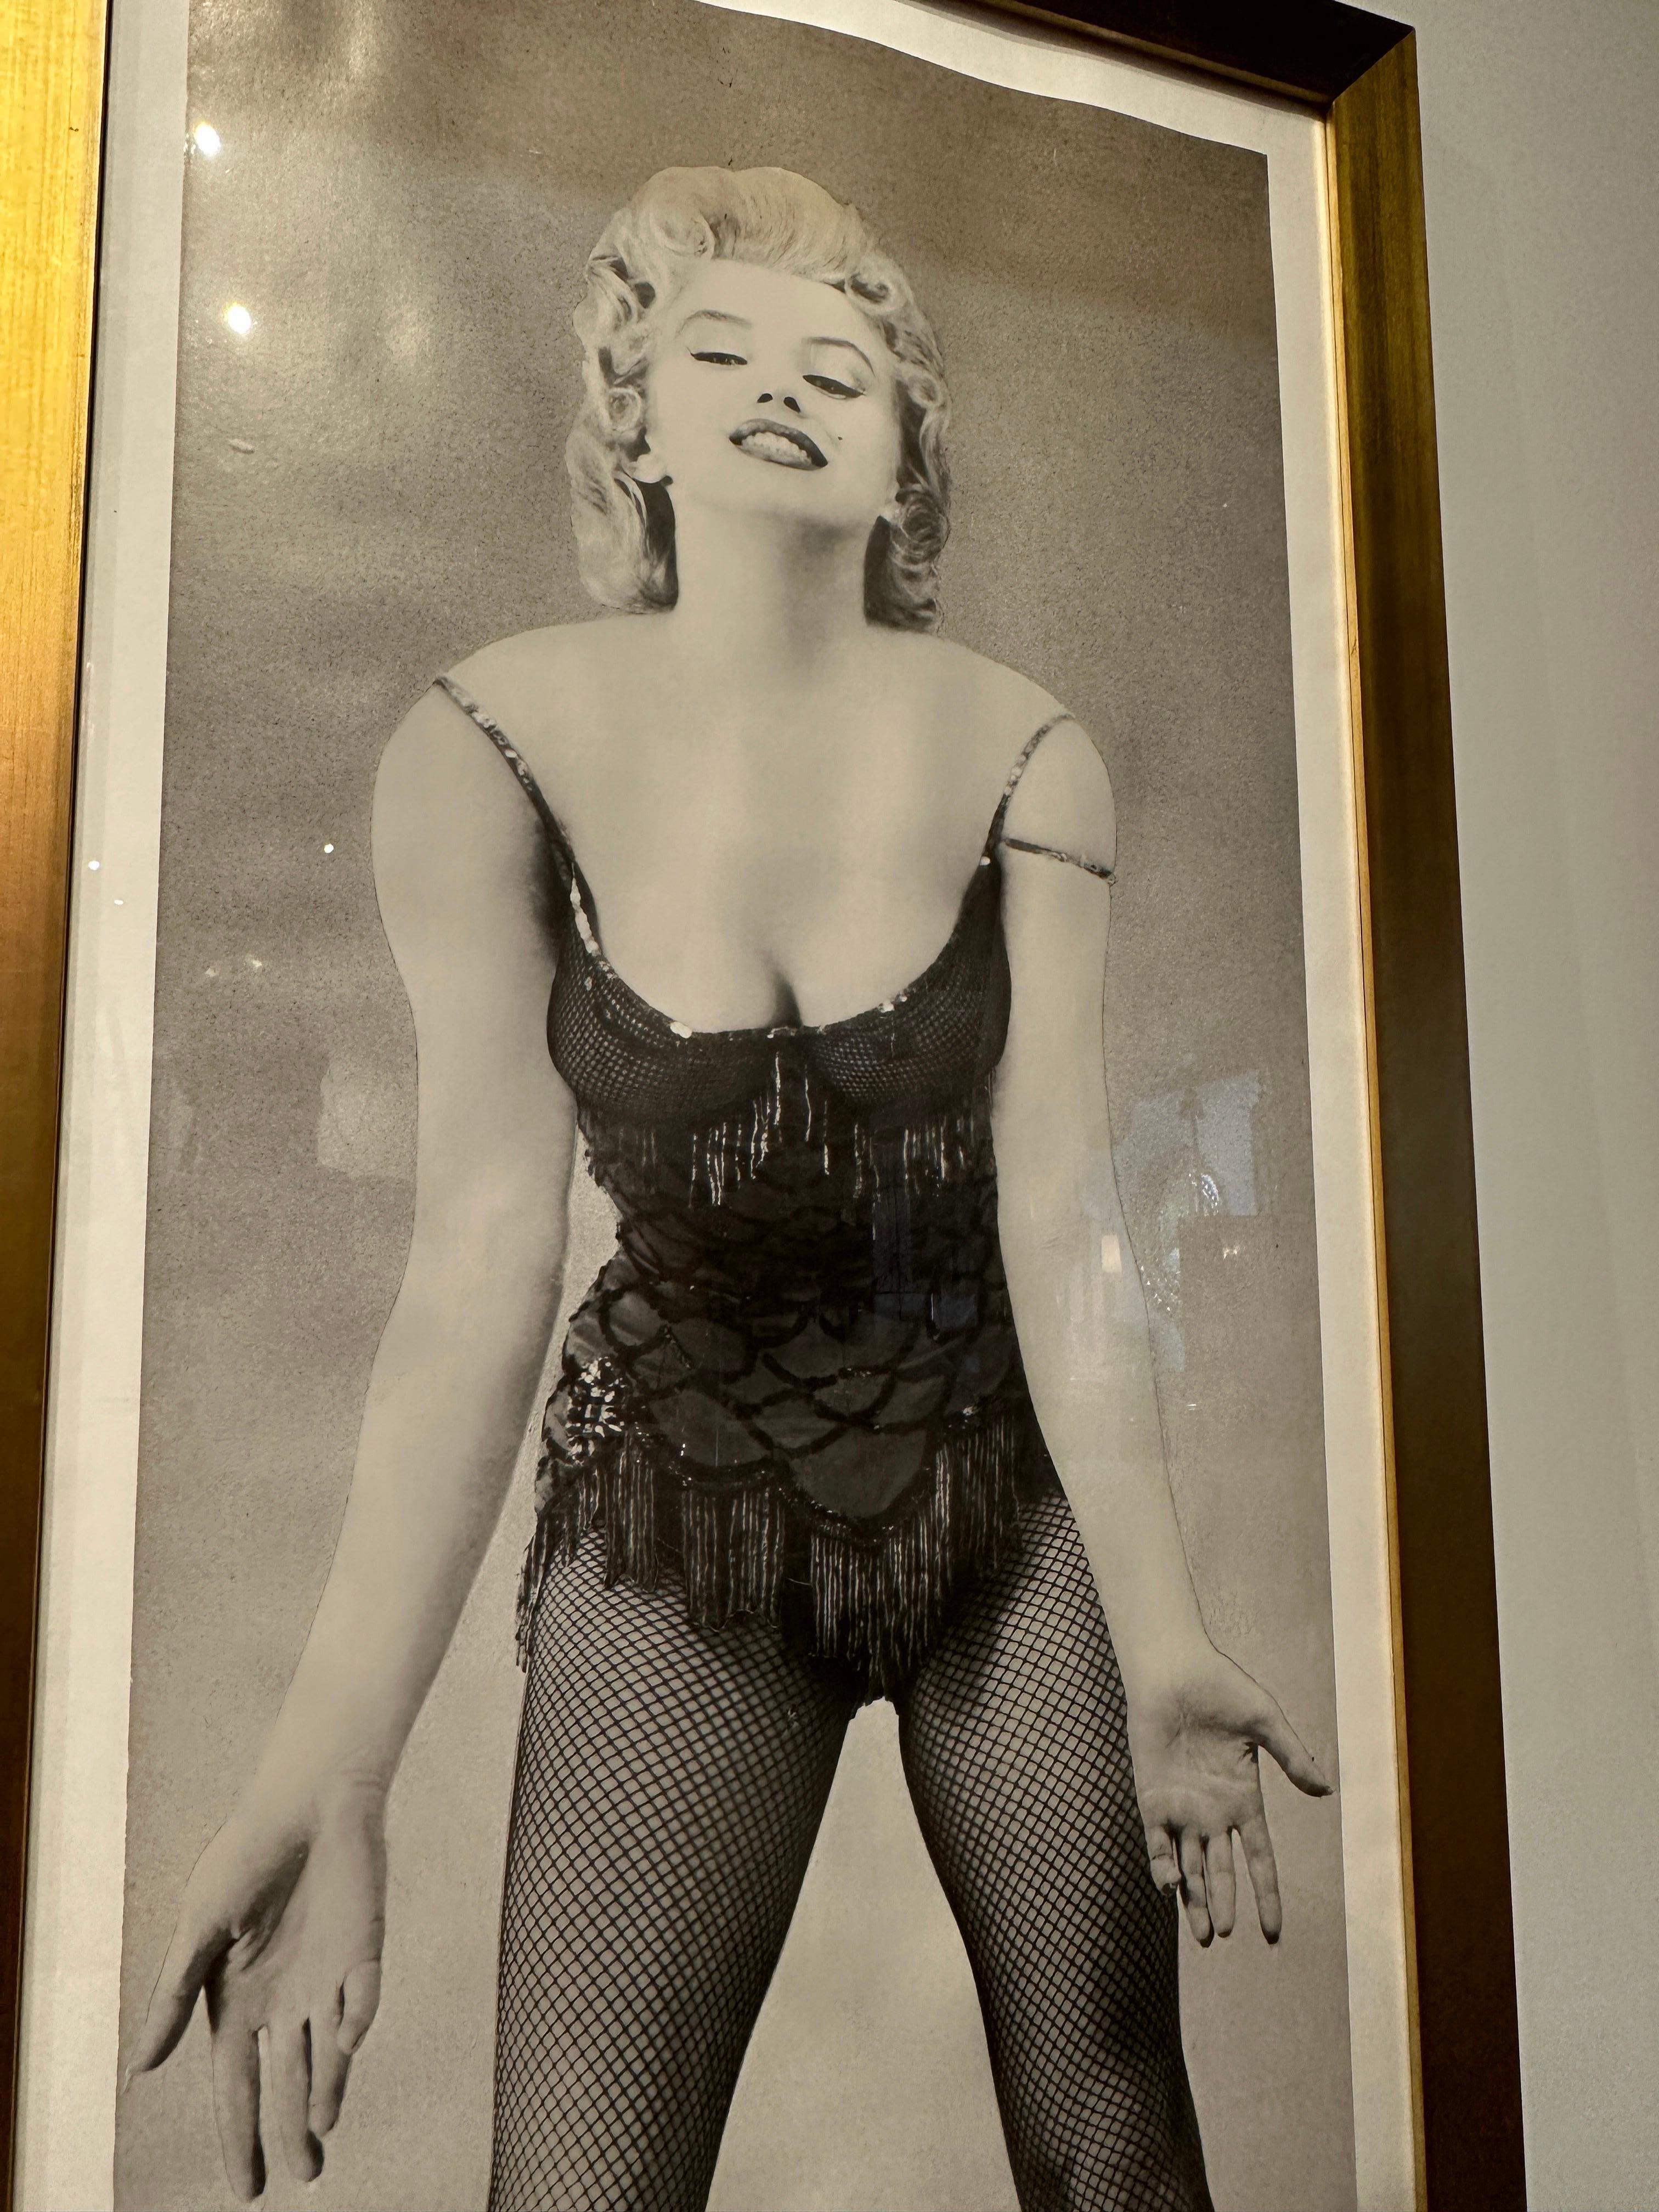 American Framed Marilyn Monroe Lithograph, 1976 For Sale